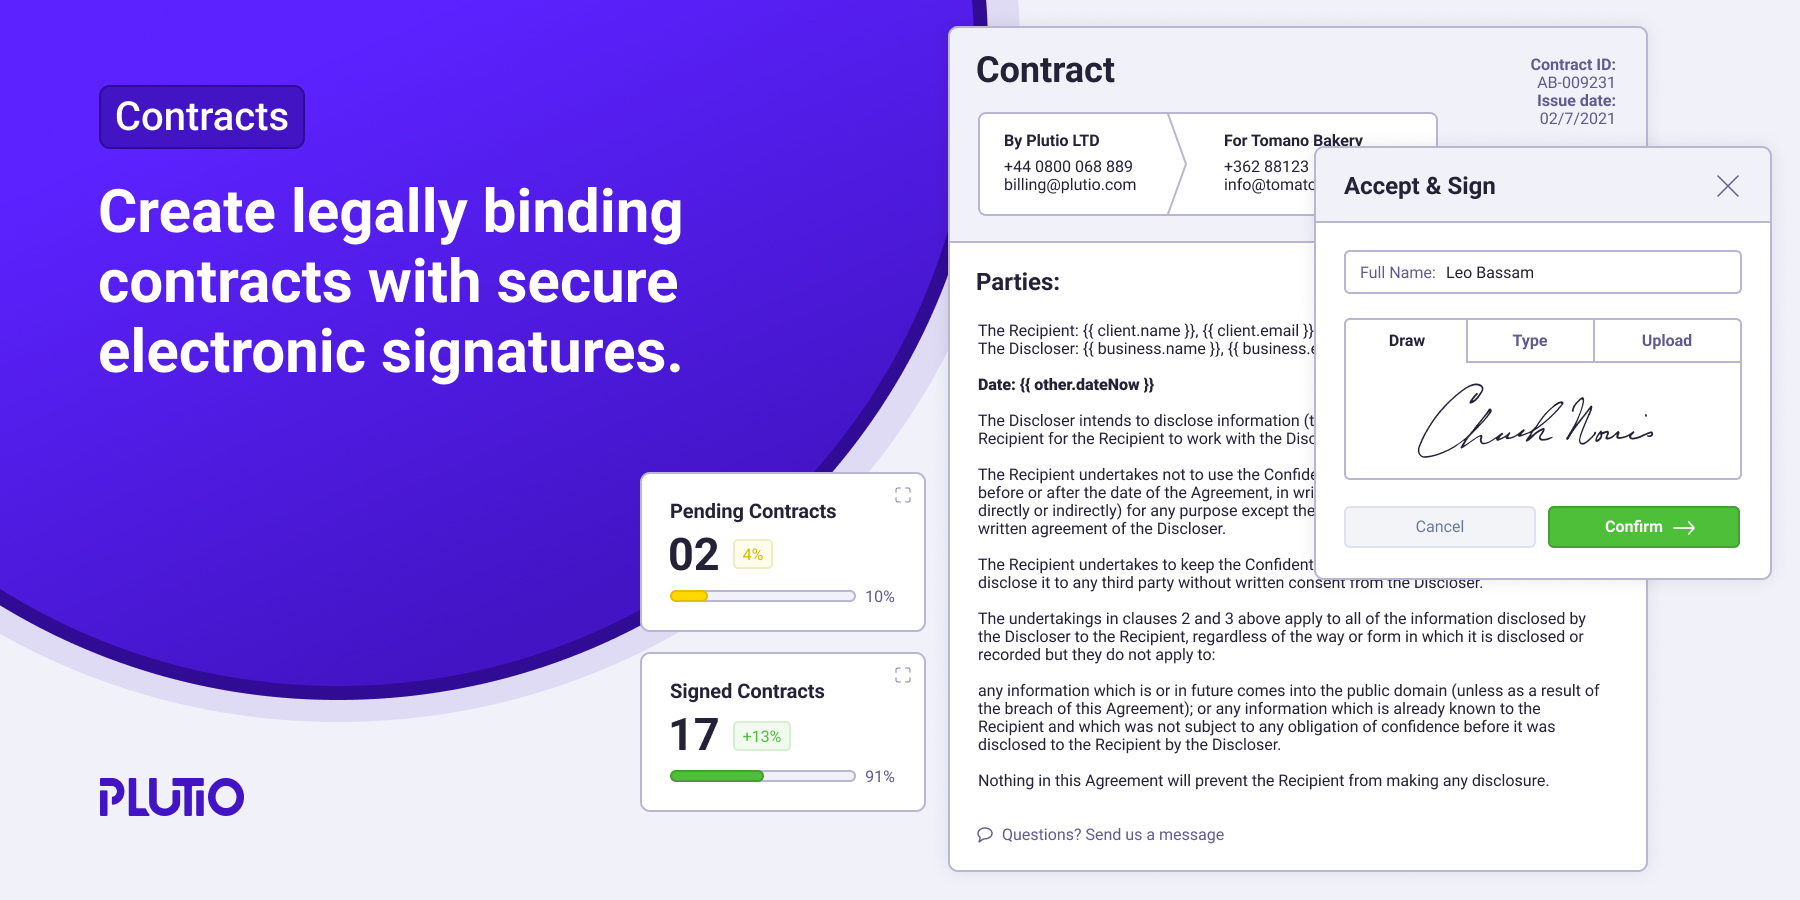 Plutio brand asset - contracts